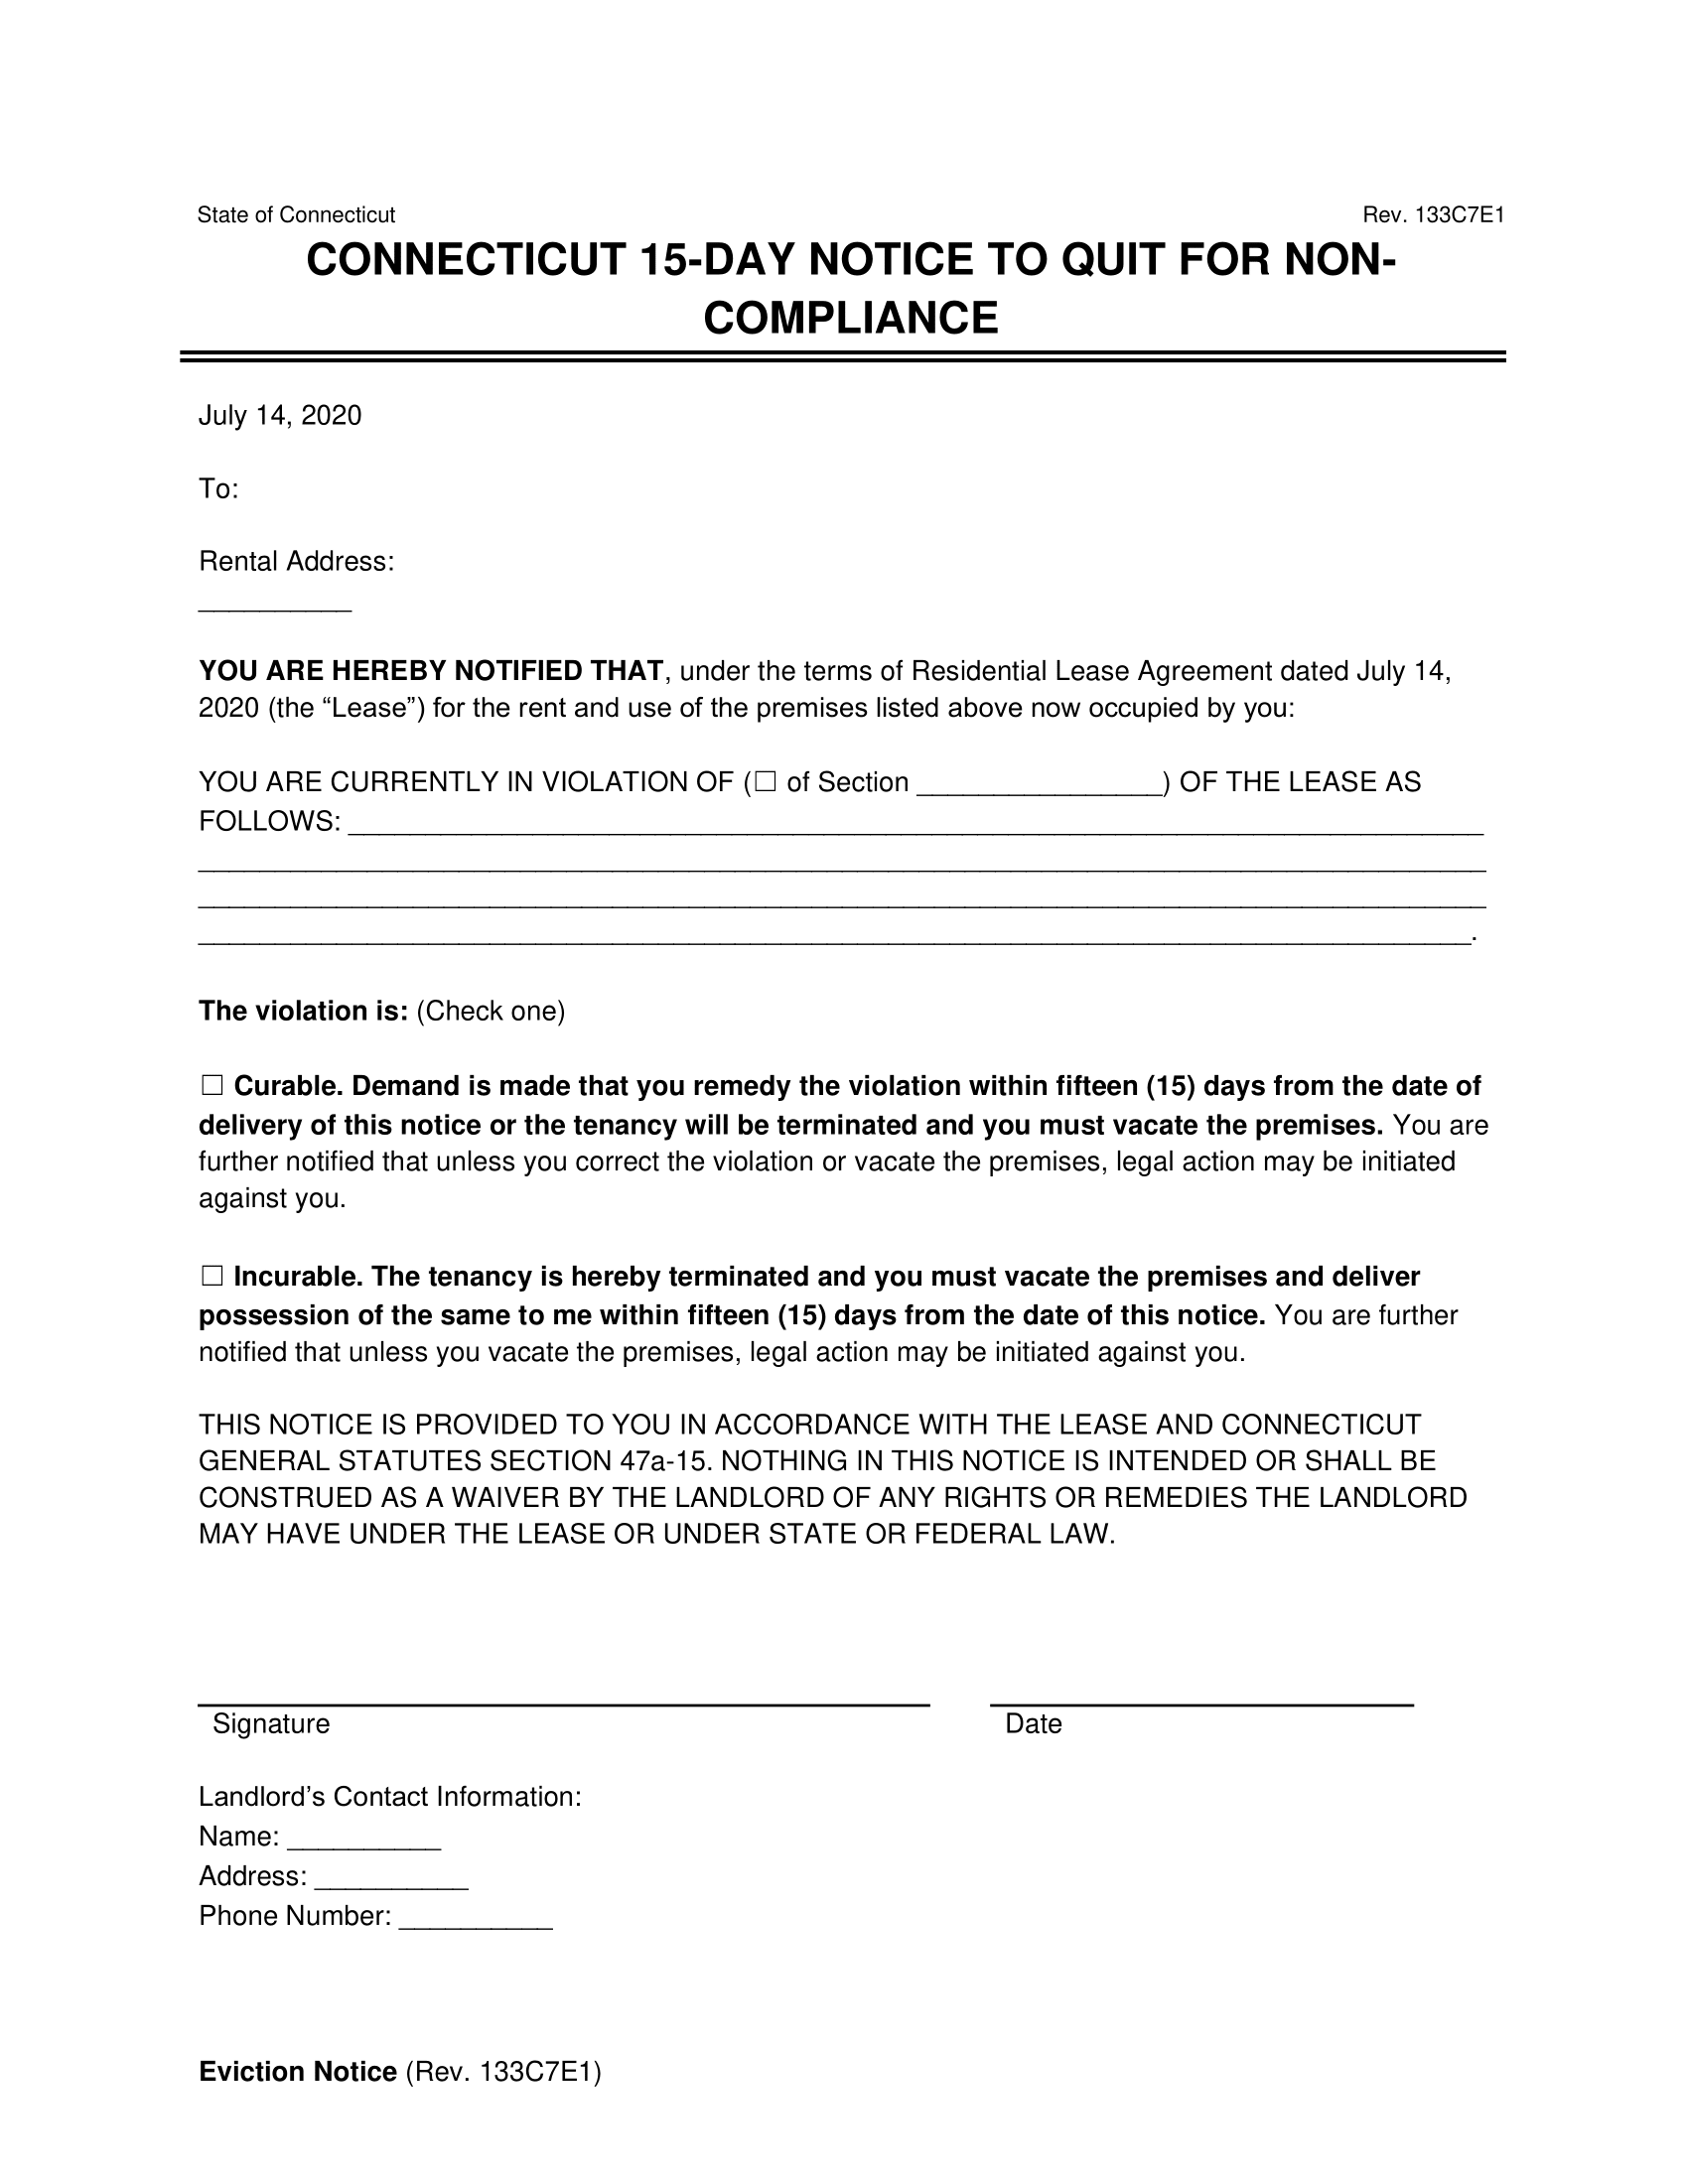 Connecticut 15-Day Notice to Quit for Non-Compliance